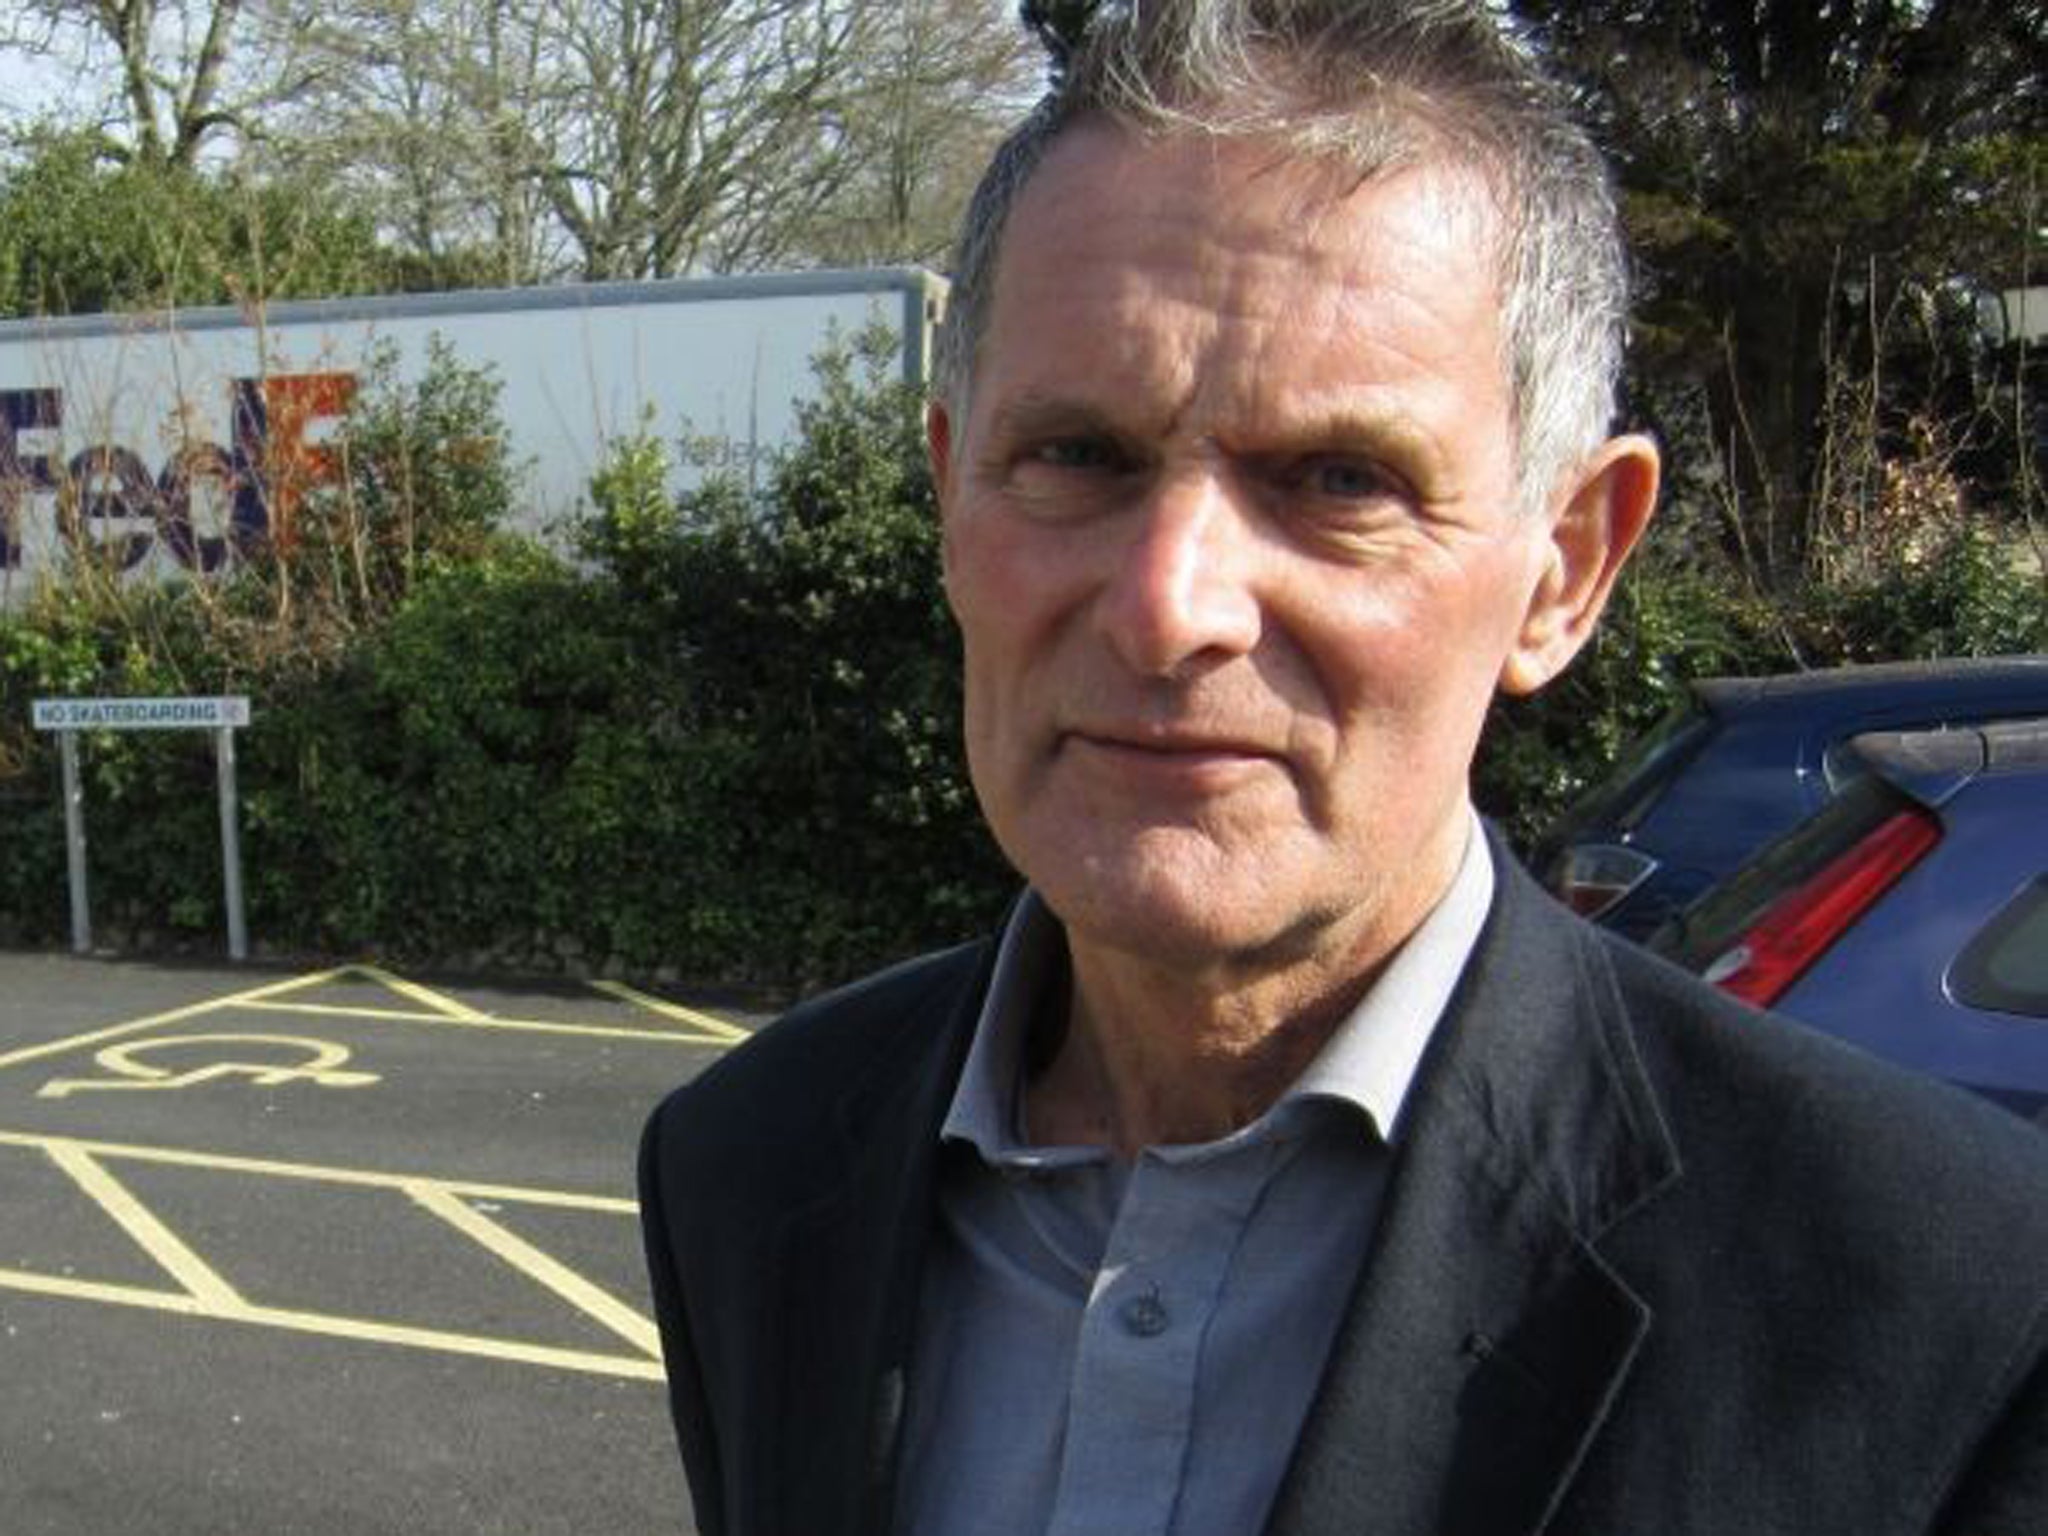 Cornwall councillor Collin Brewer, has resigned for a second time in less than six months over comments he made about the disabled